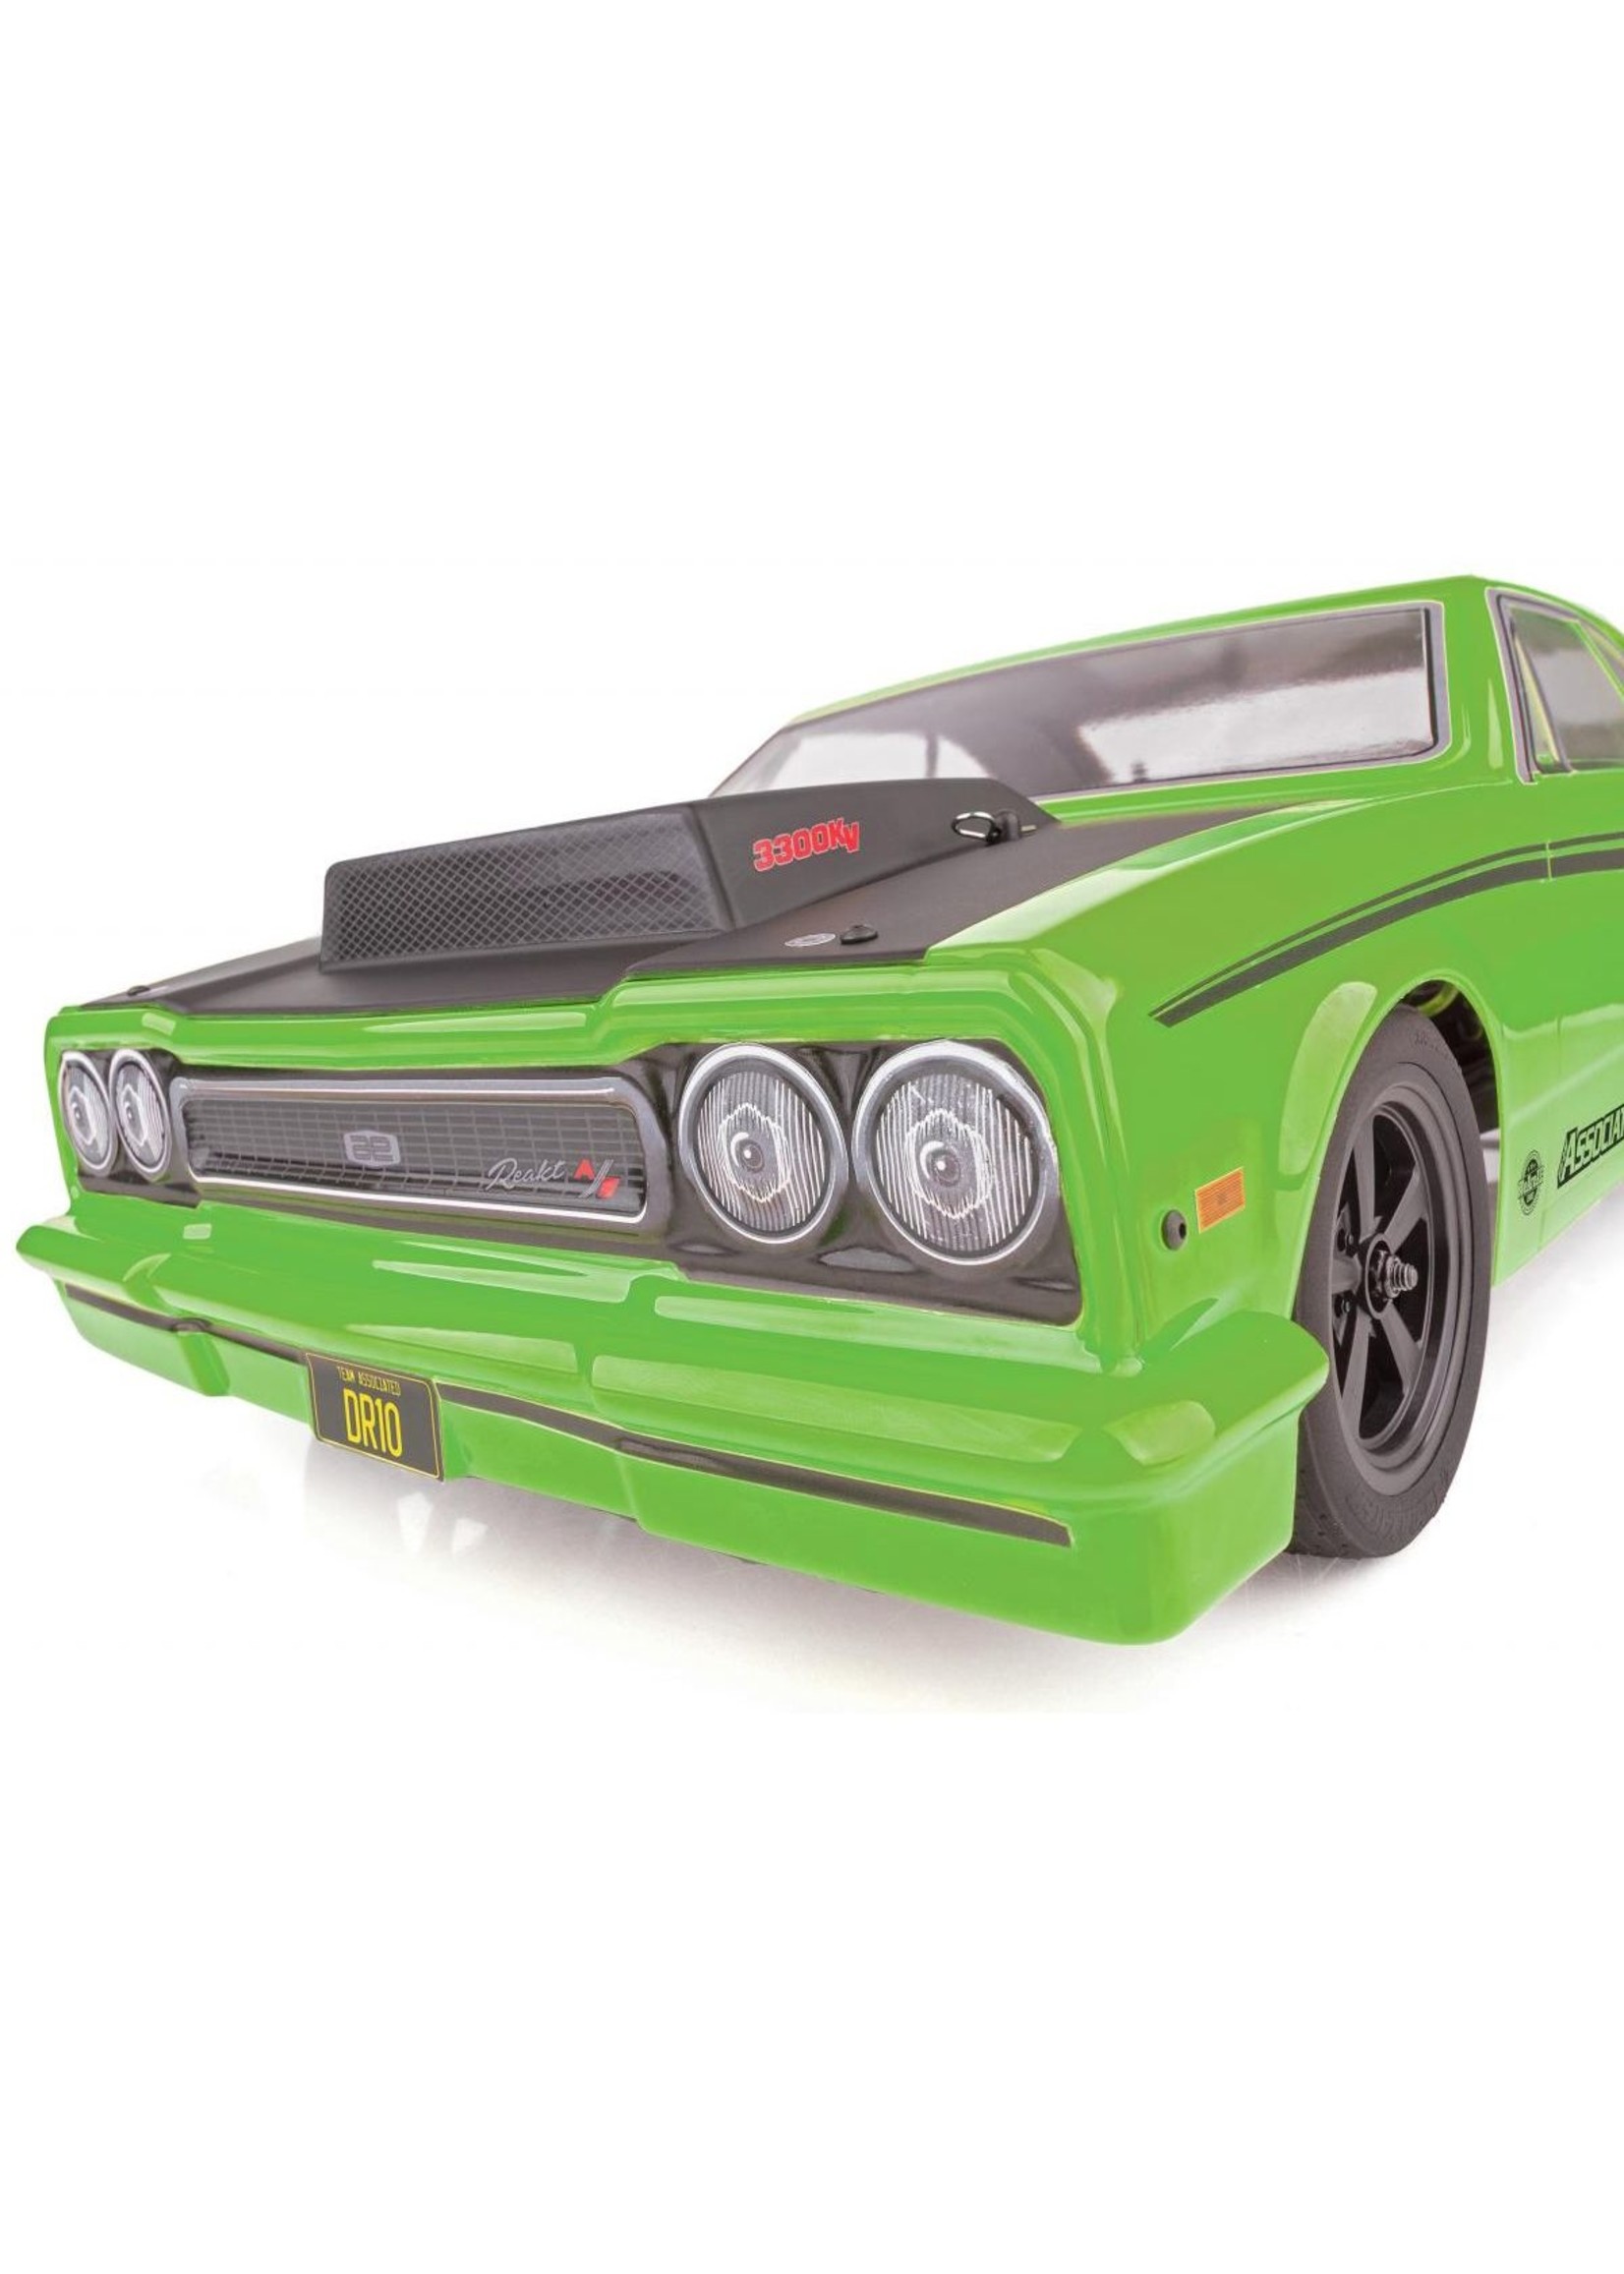 Associated 1/10 DR10 2WD Drag Race Car Brushless RTR - Green